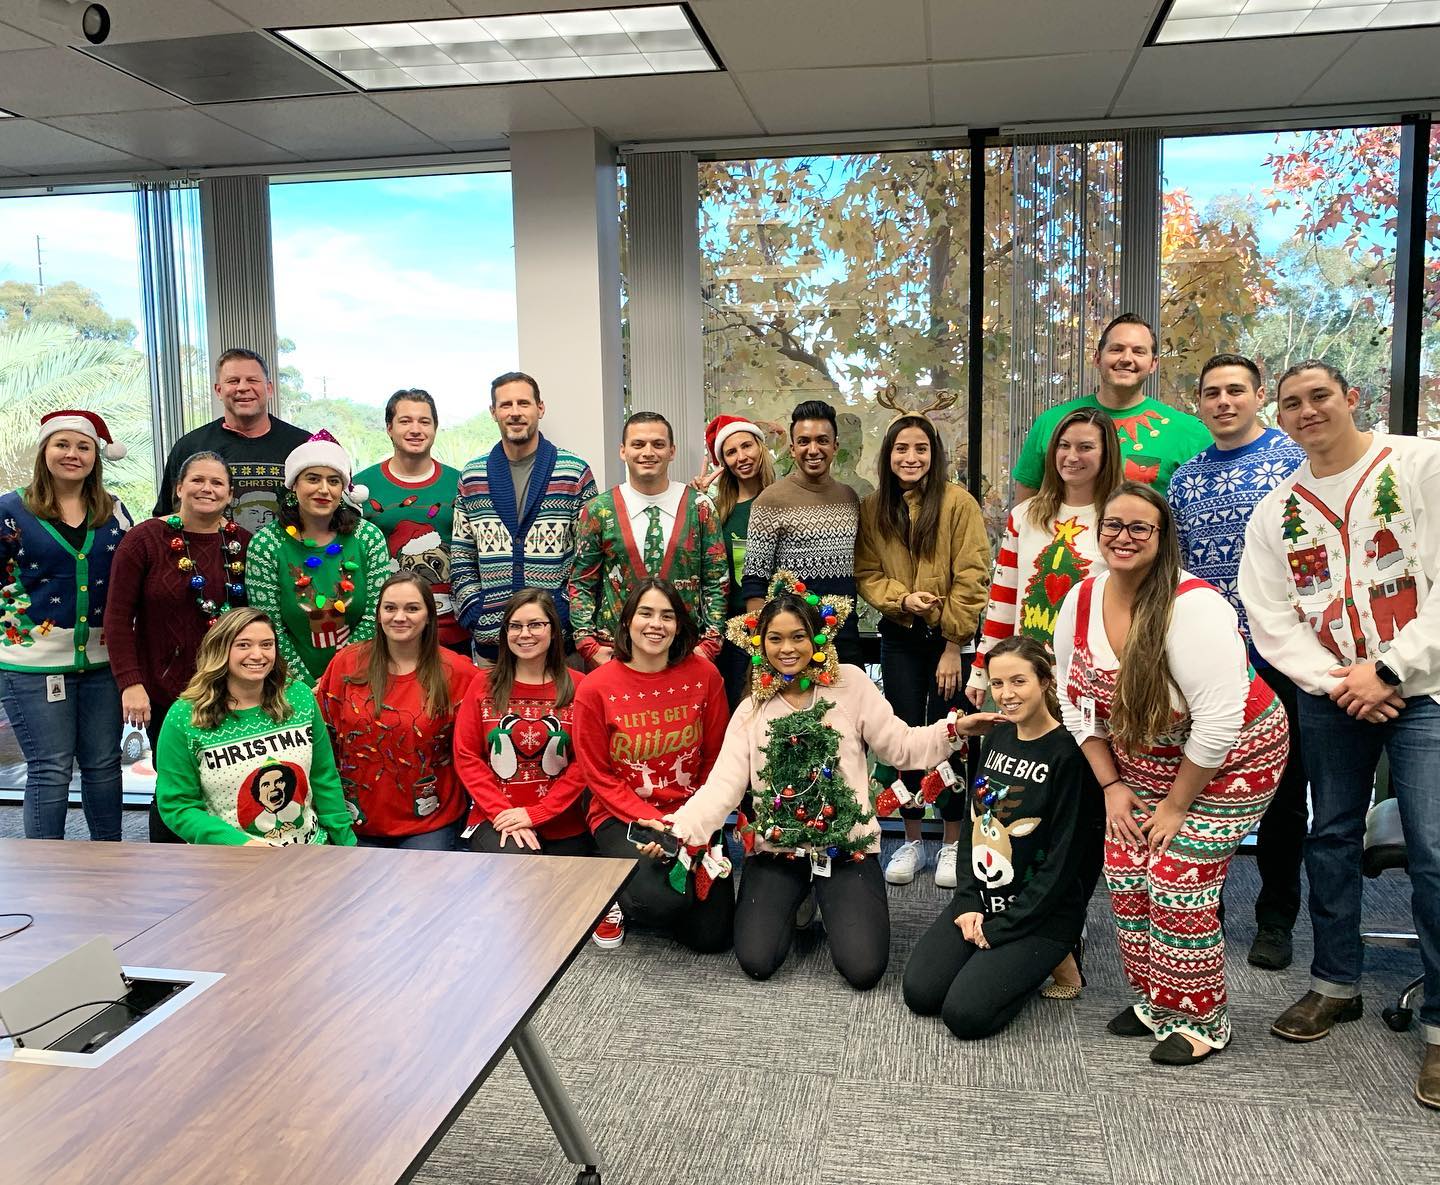 Company employee ugly christmas sweater party